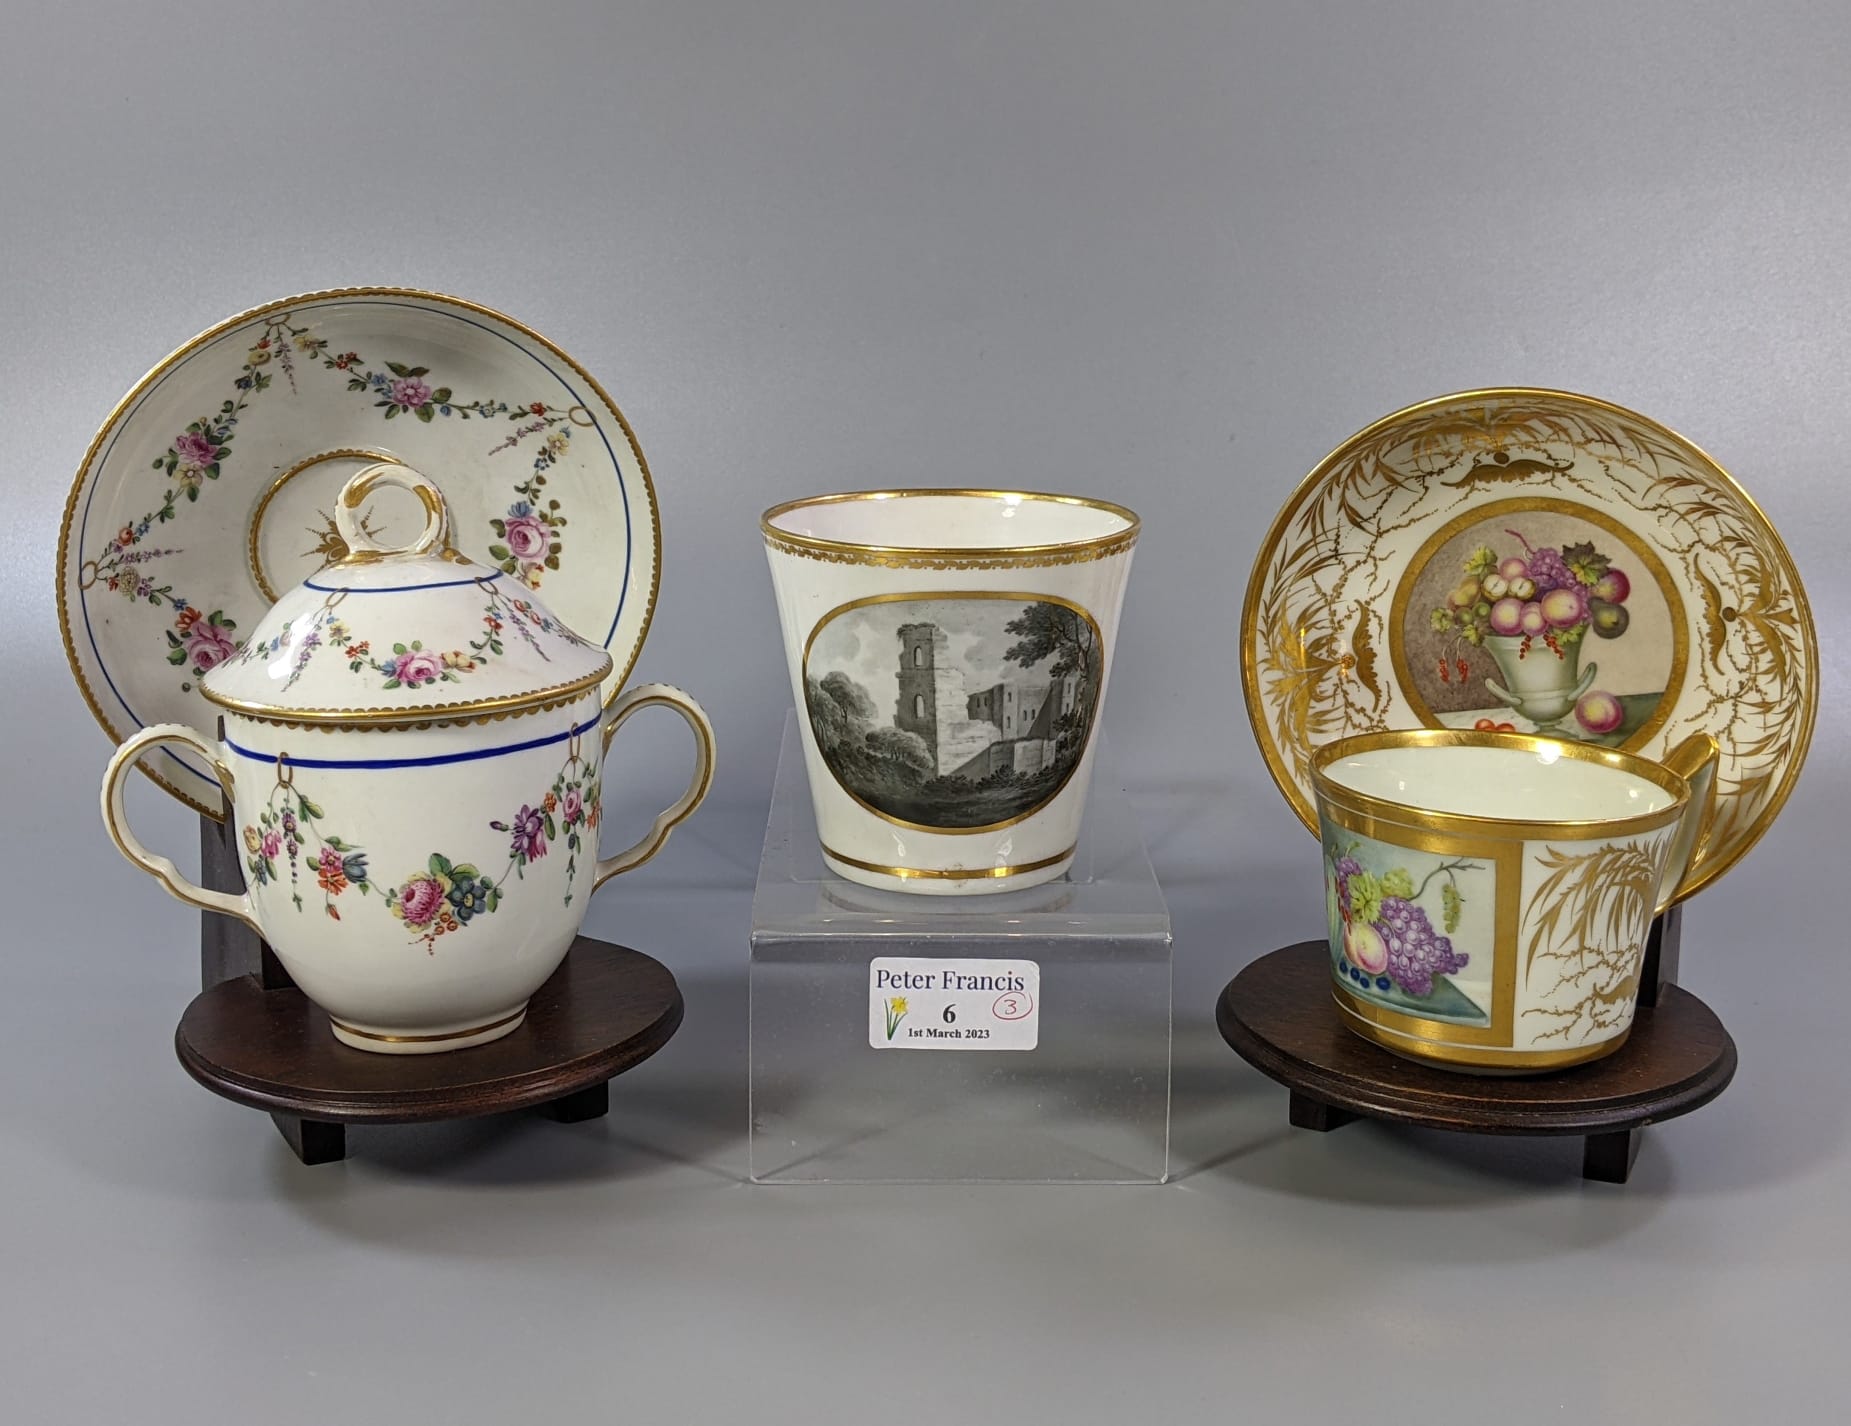 Collection of 19th Century Derby porcelain items to include: two handled chocolate lidded cup on